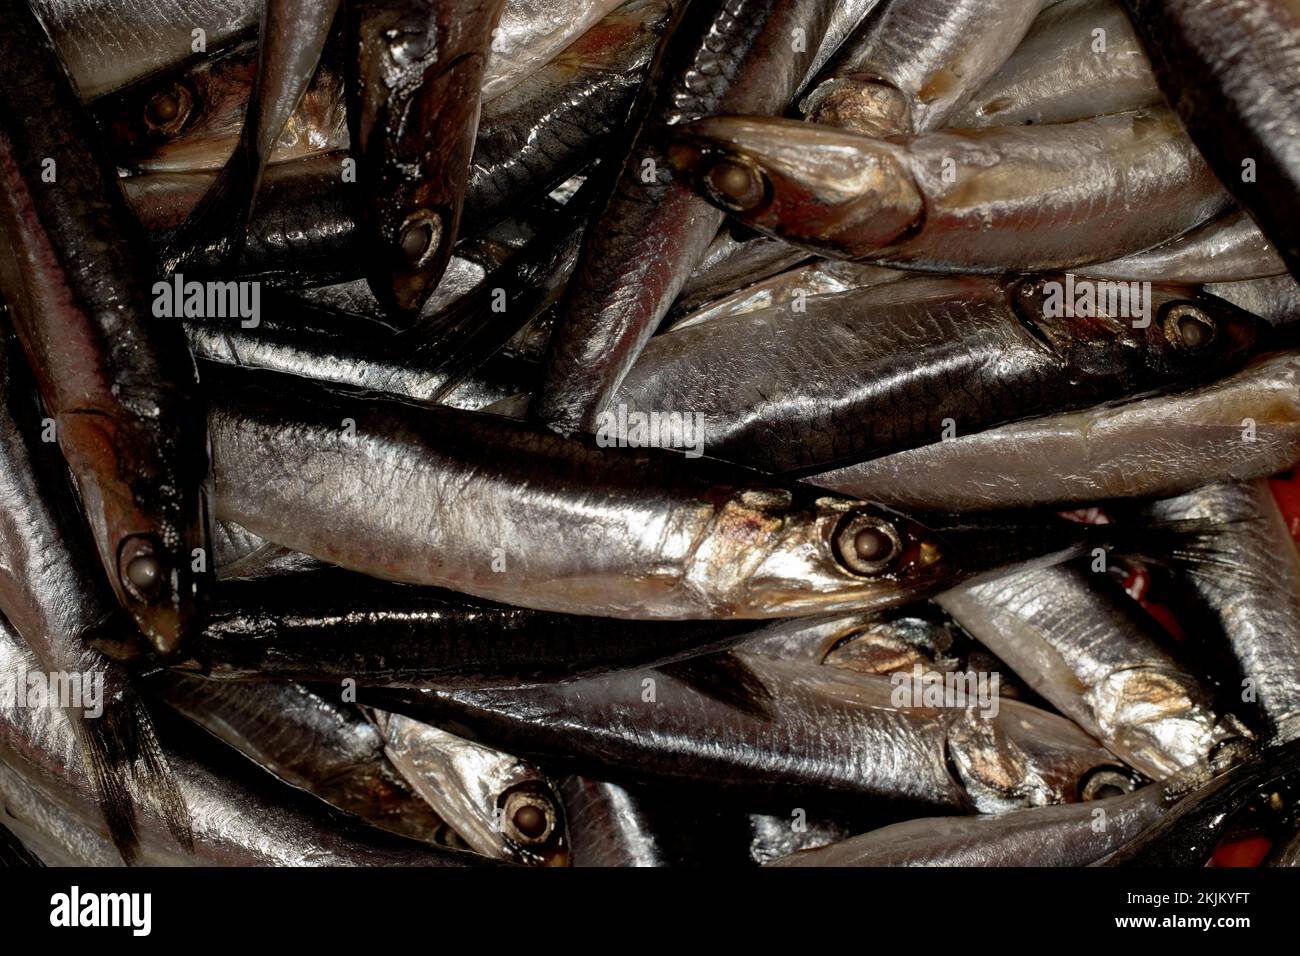 Anchovies, european anchovy (Engraulis encrasicolus) anchovies, food photography Stock Photo